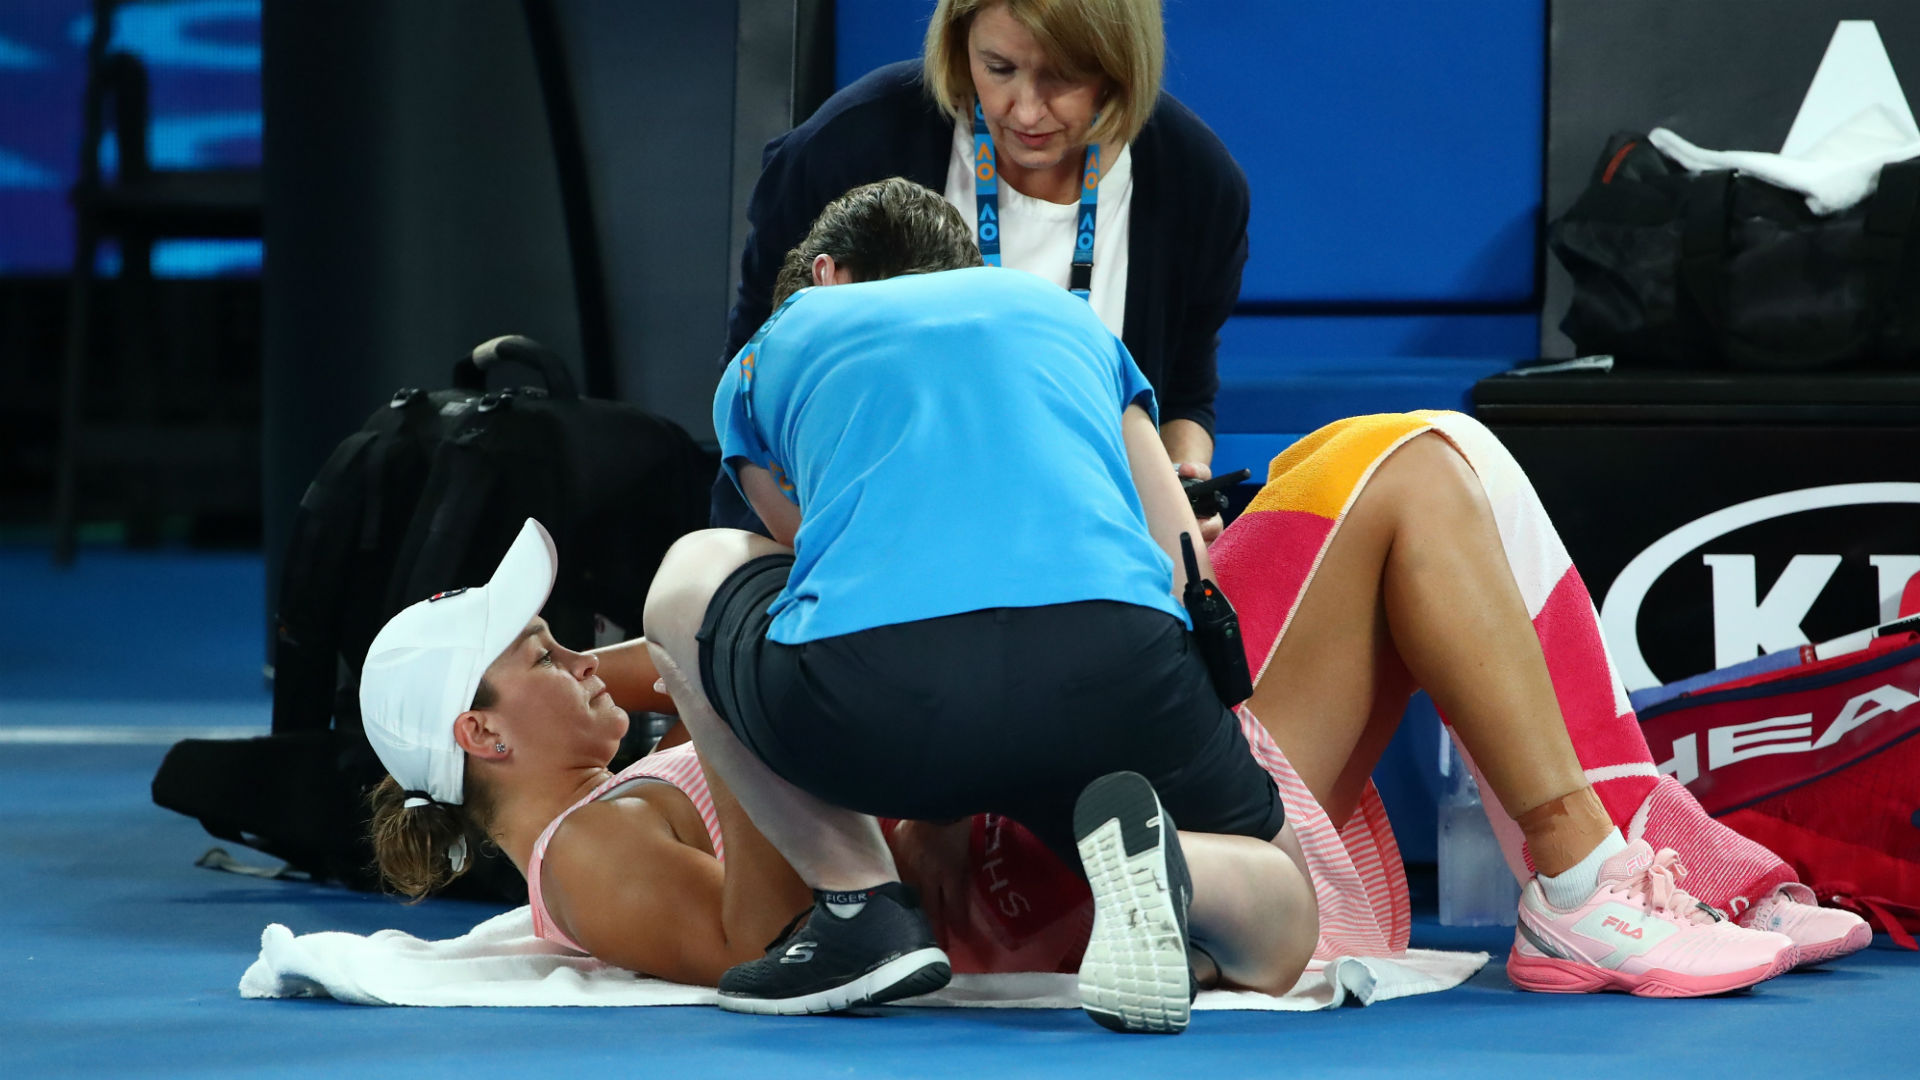 Australian Open: Ash Barty withdraws from women's doubles after injury concern ...1920 x 1080